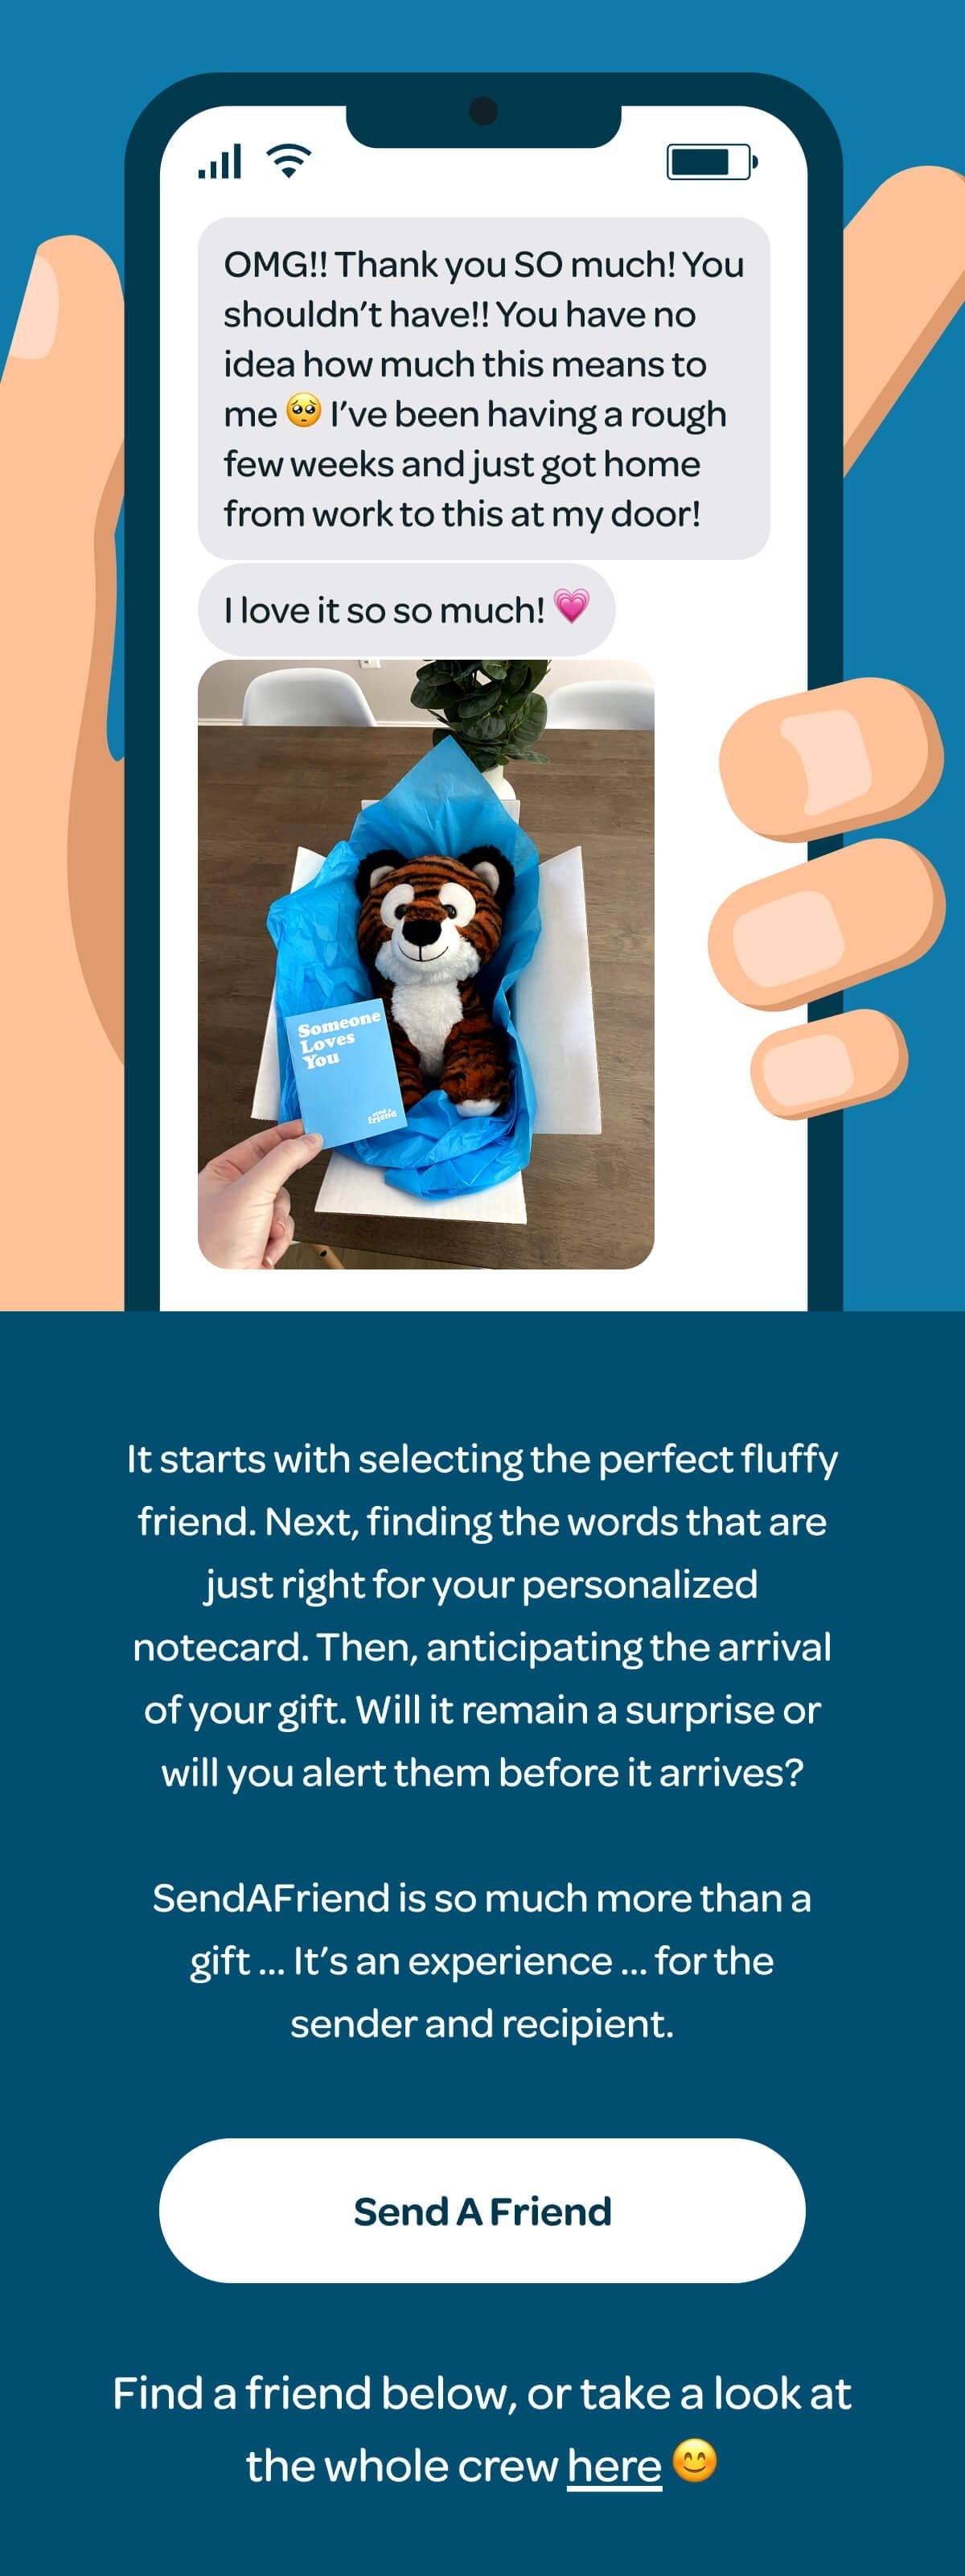 It starts with selecting the perfect fluffy friend. Next, finding the words that are just right for your personalized notecard. Then, anticipating the arrival of your gift. Will it remain a surprise or will you alert them before it arrives? SendAFriend is so much more than a gift … It’s an experience … for the sender and recipient. [SendAFriend]